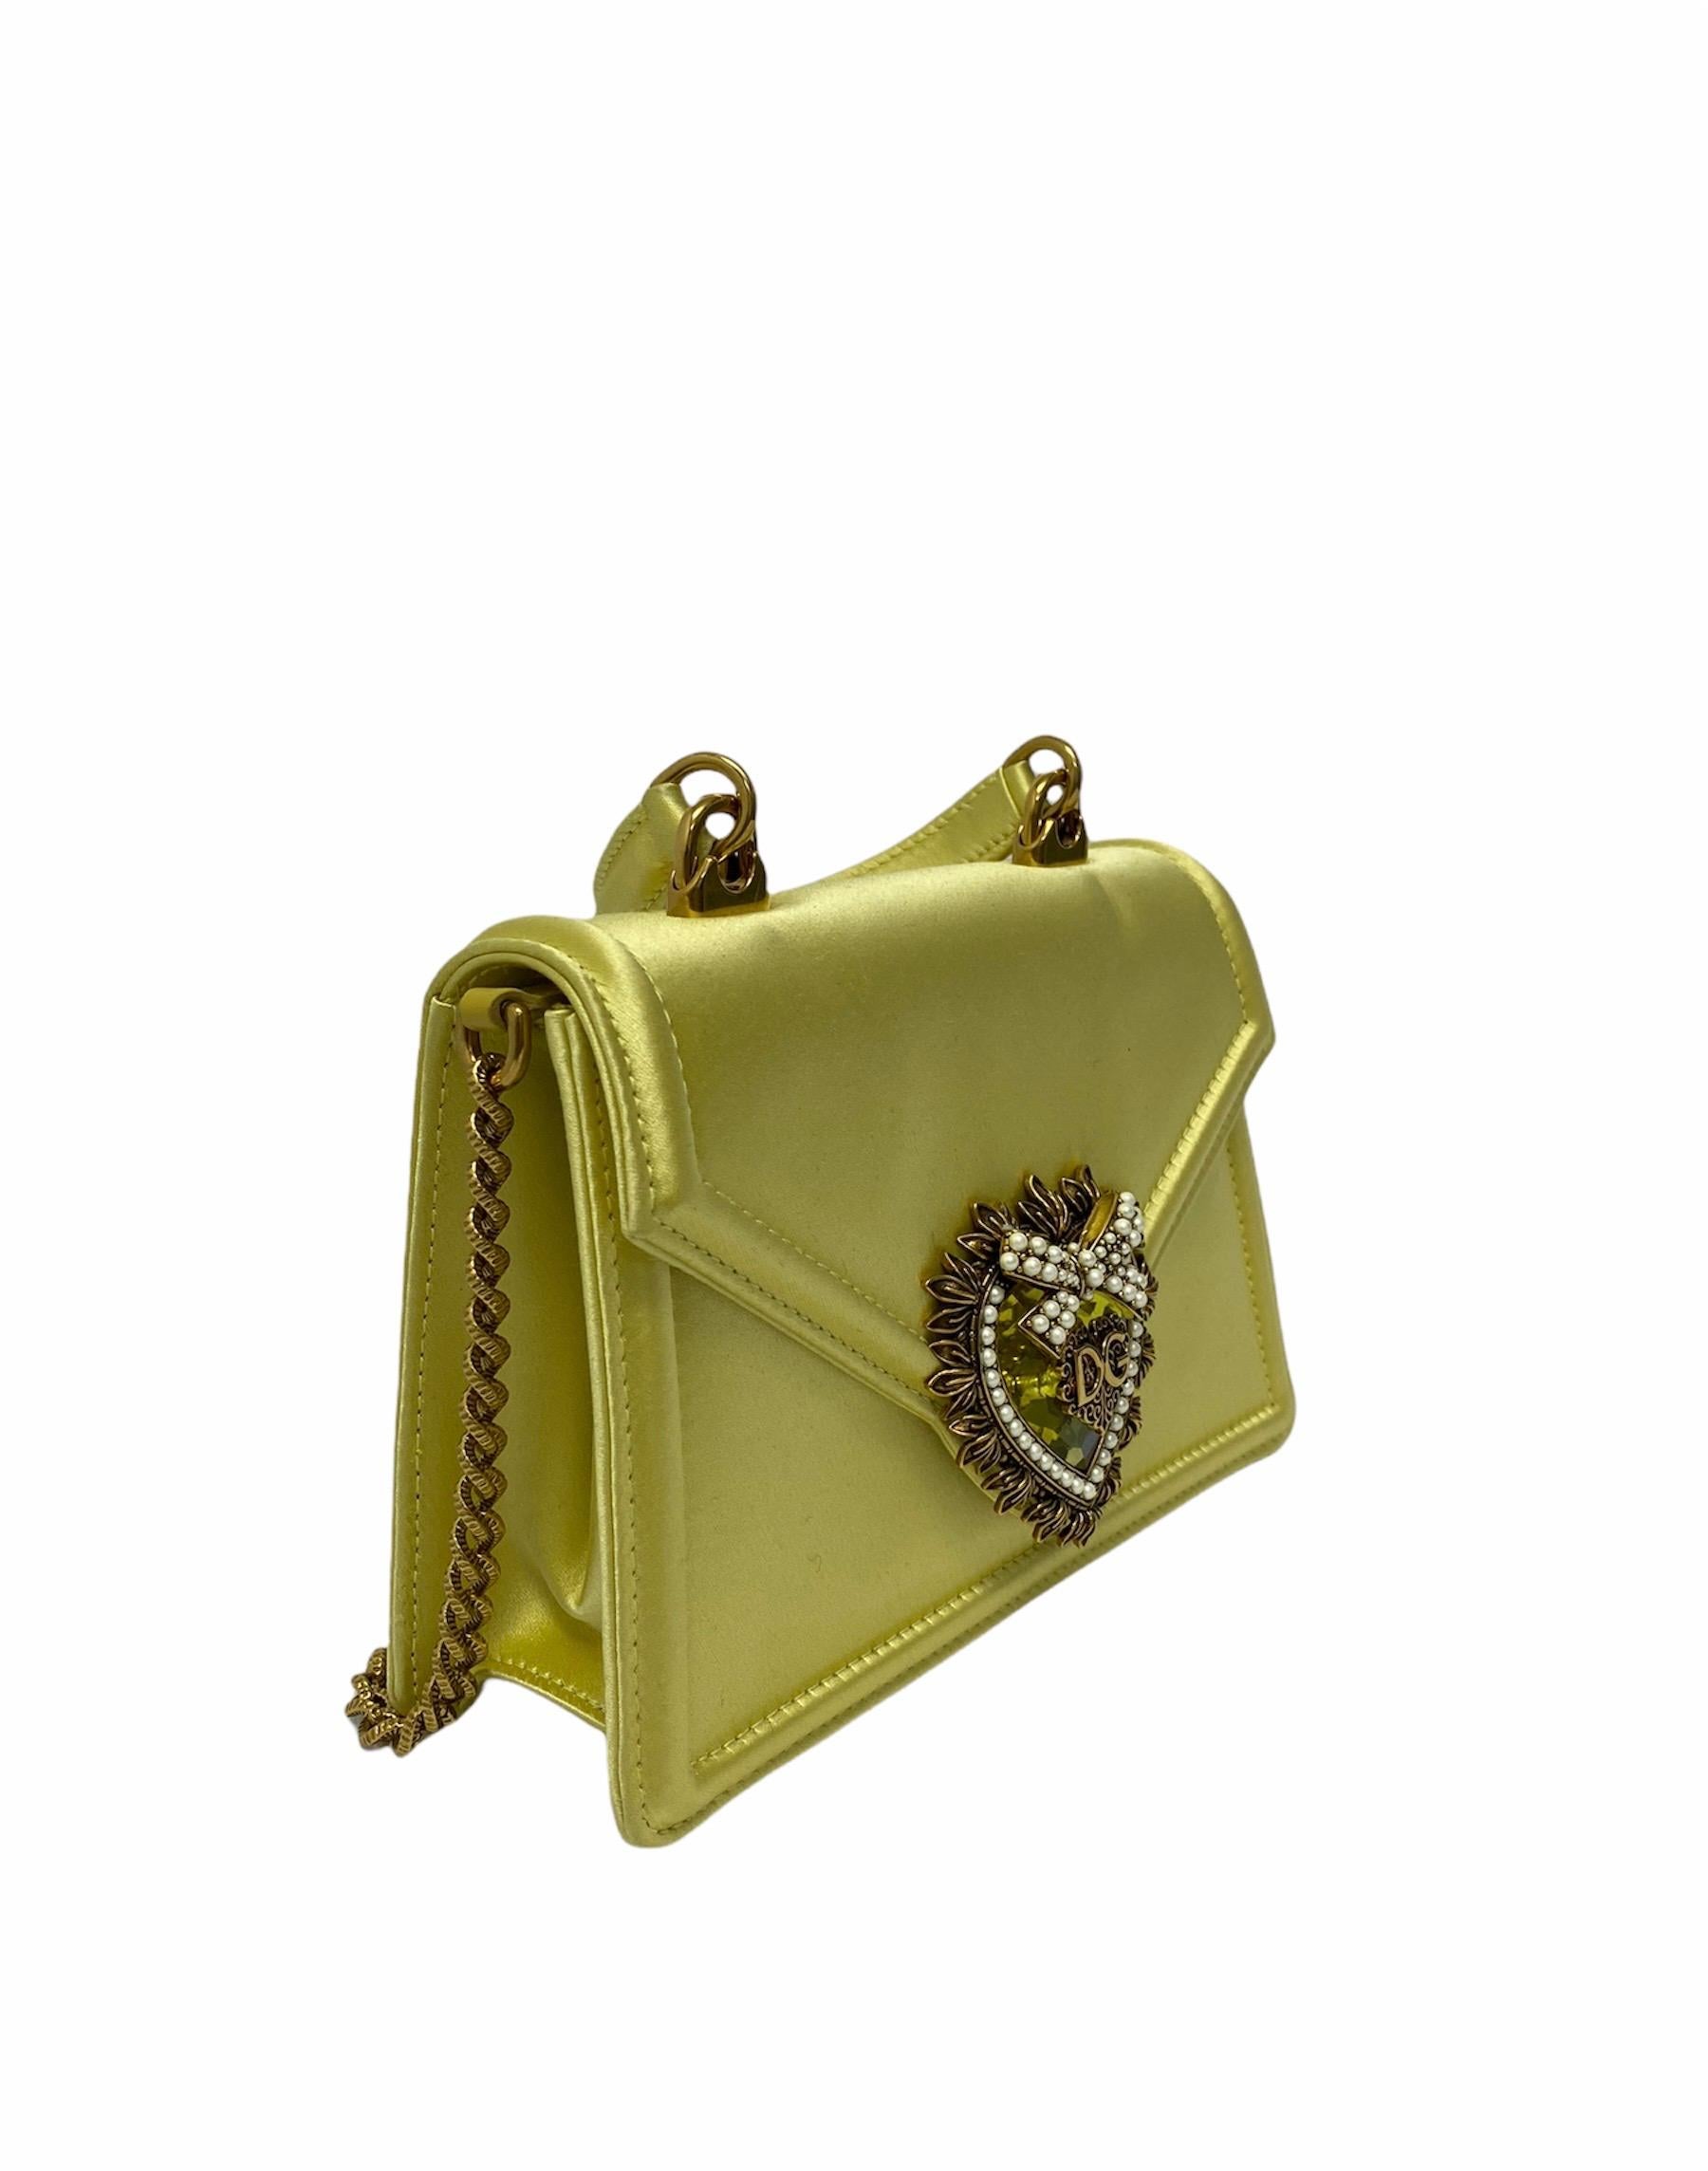 Fantastic bag by Dolce & Gabbana Devotion line made of yellow satin with golden hardware, embellished with pearls and crystals. Button closure, internally roomy for the essentials. Equipped with a top handle and chain shoulder strap, to wear it as